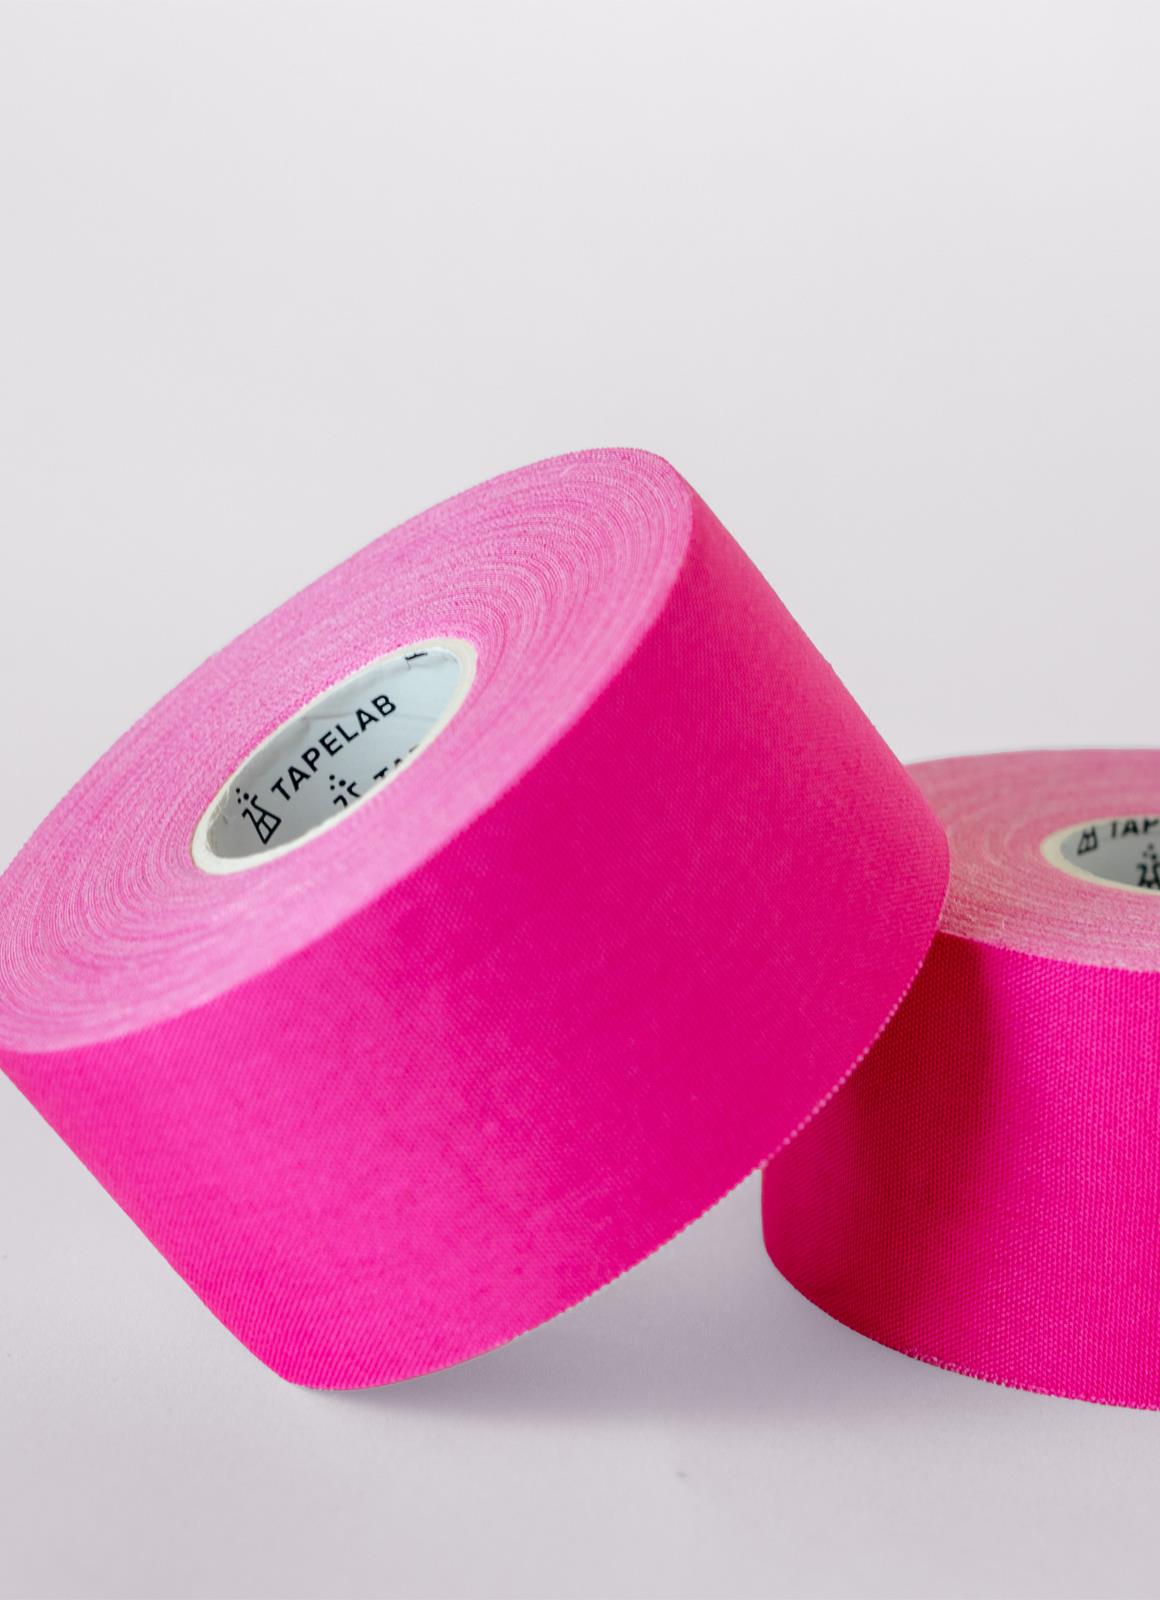 Athletic_Tape_pink_1